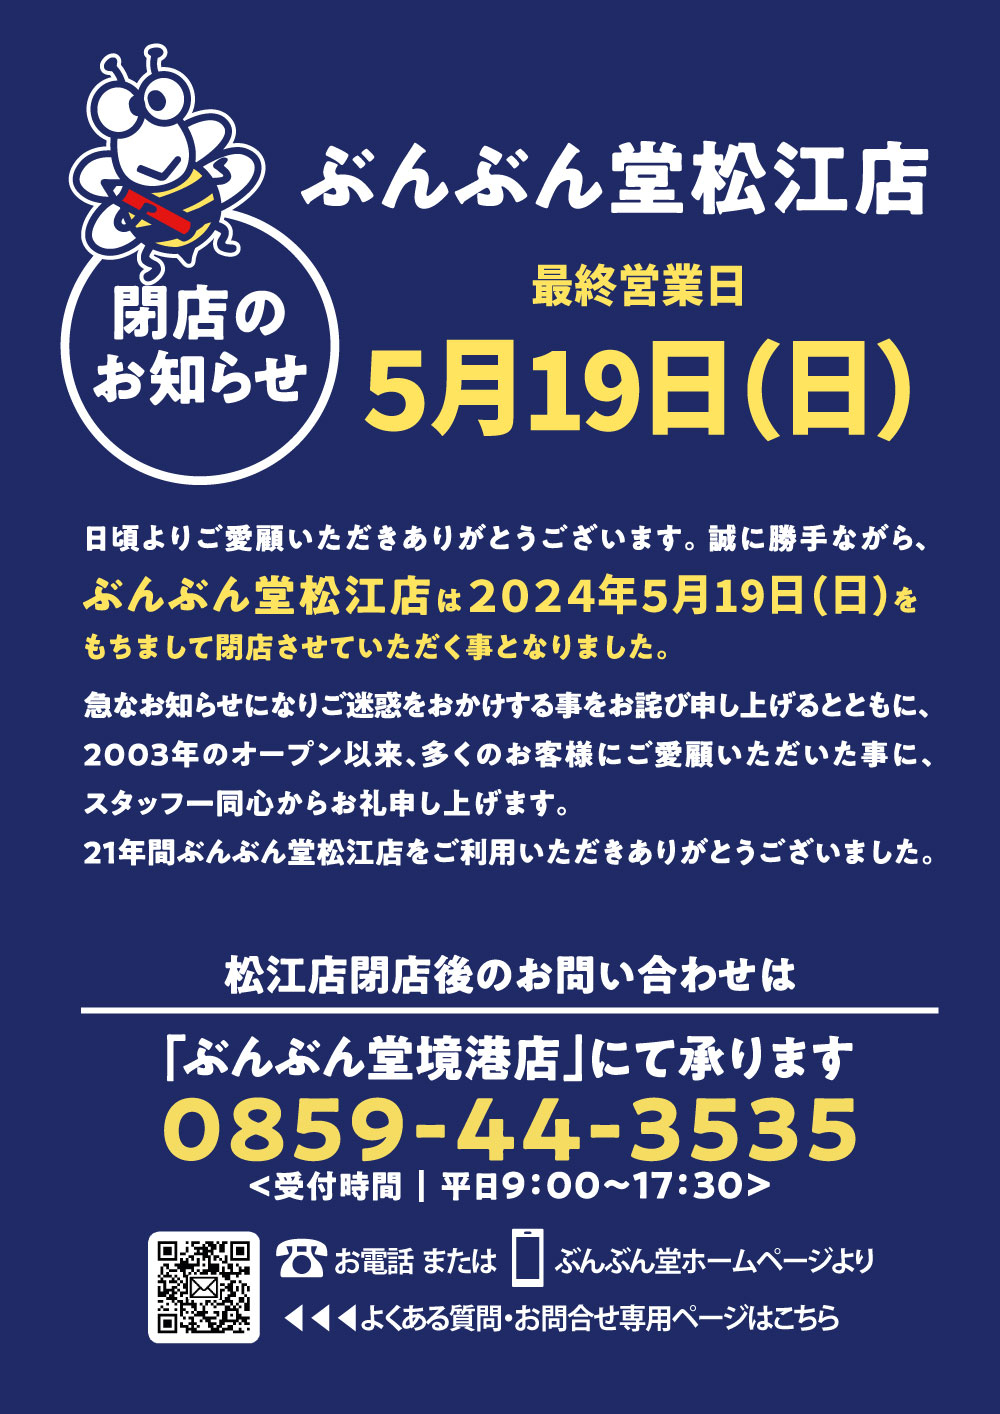 SNS＿サムネ＿5月15日80％OFF閉店日＿スクエア＿A3＿B.jpg